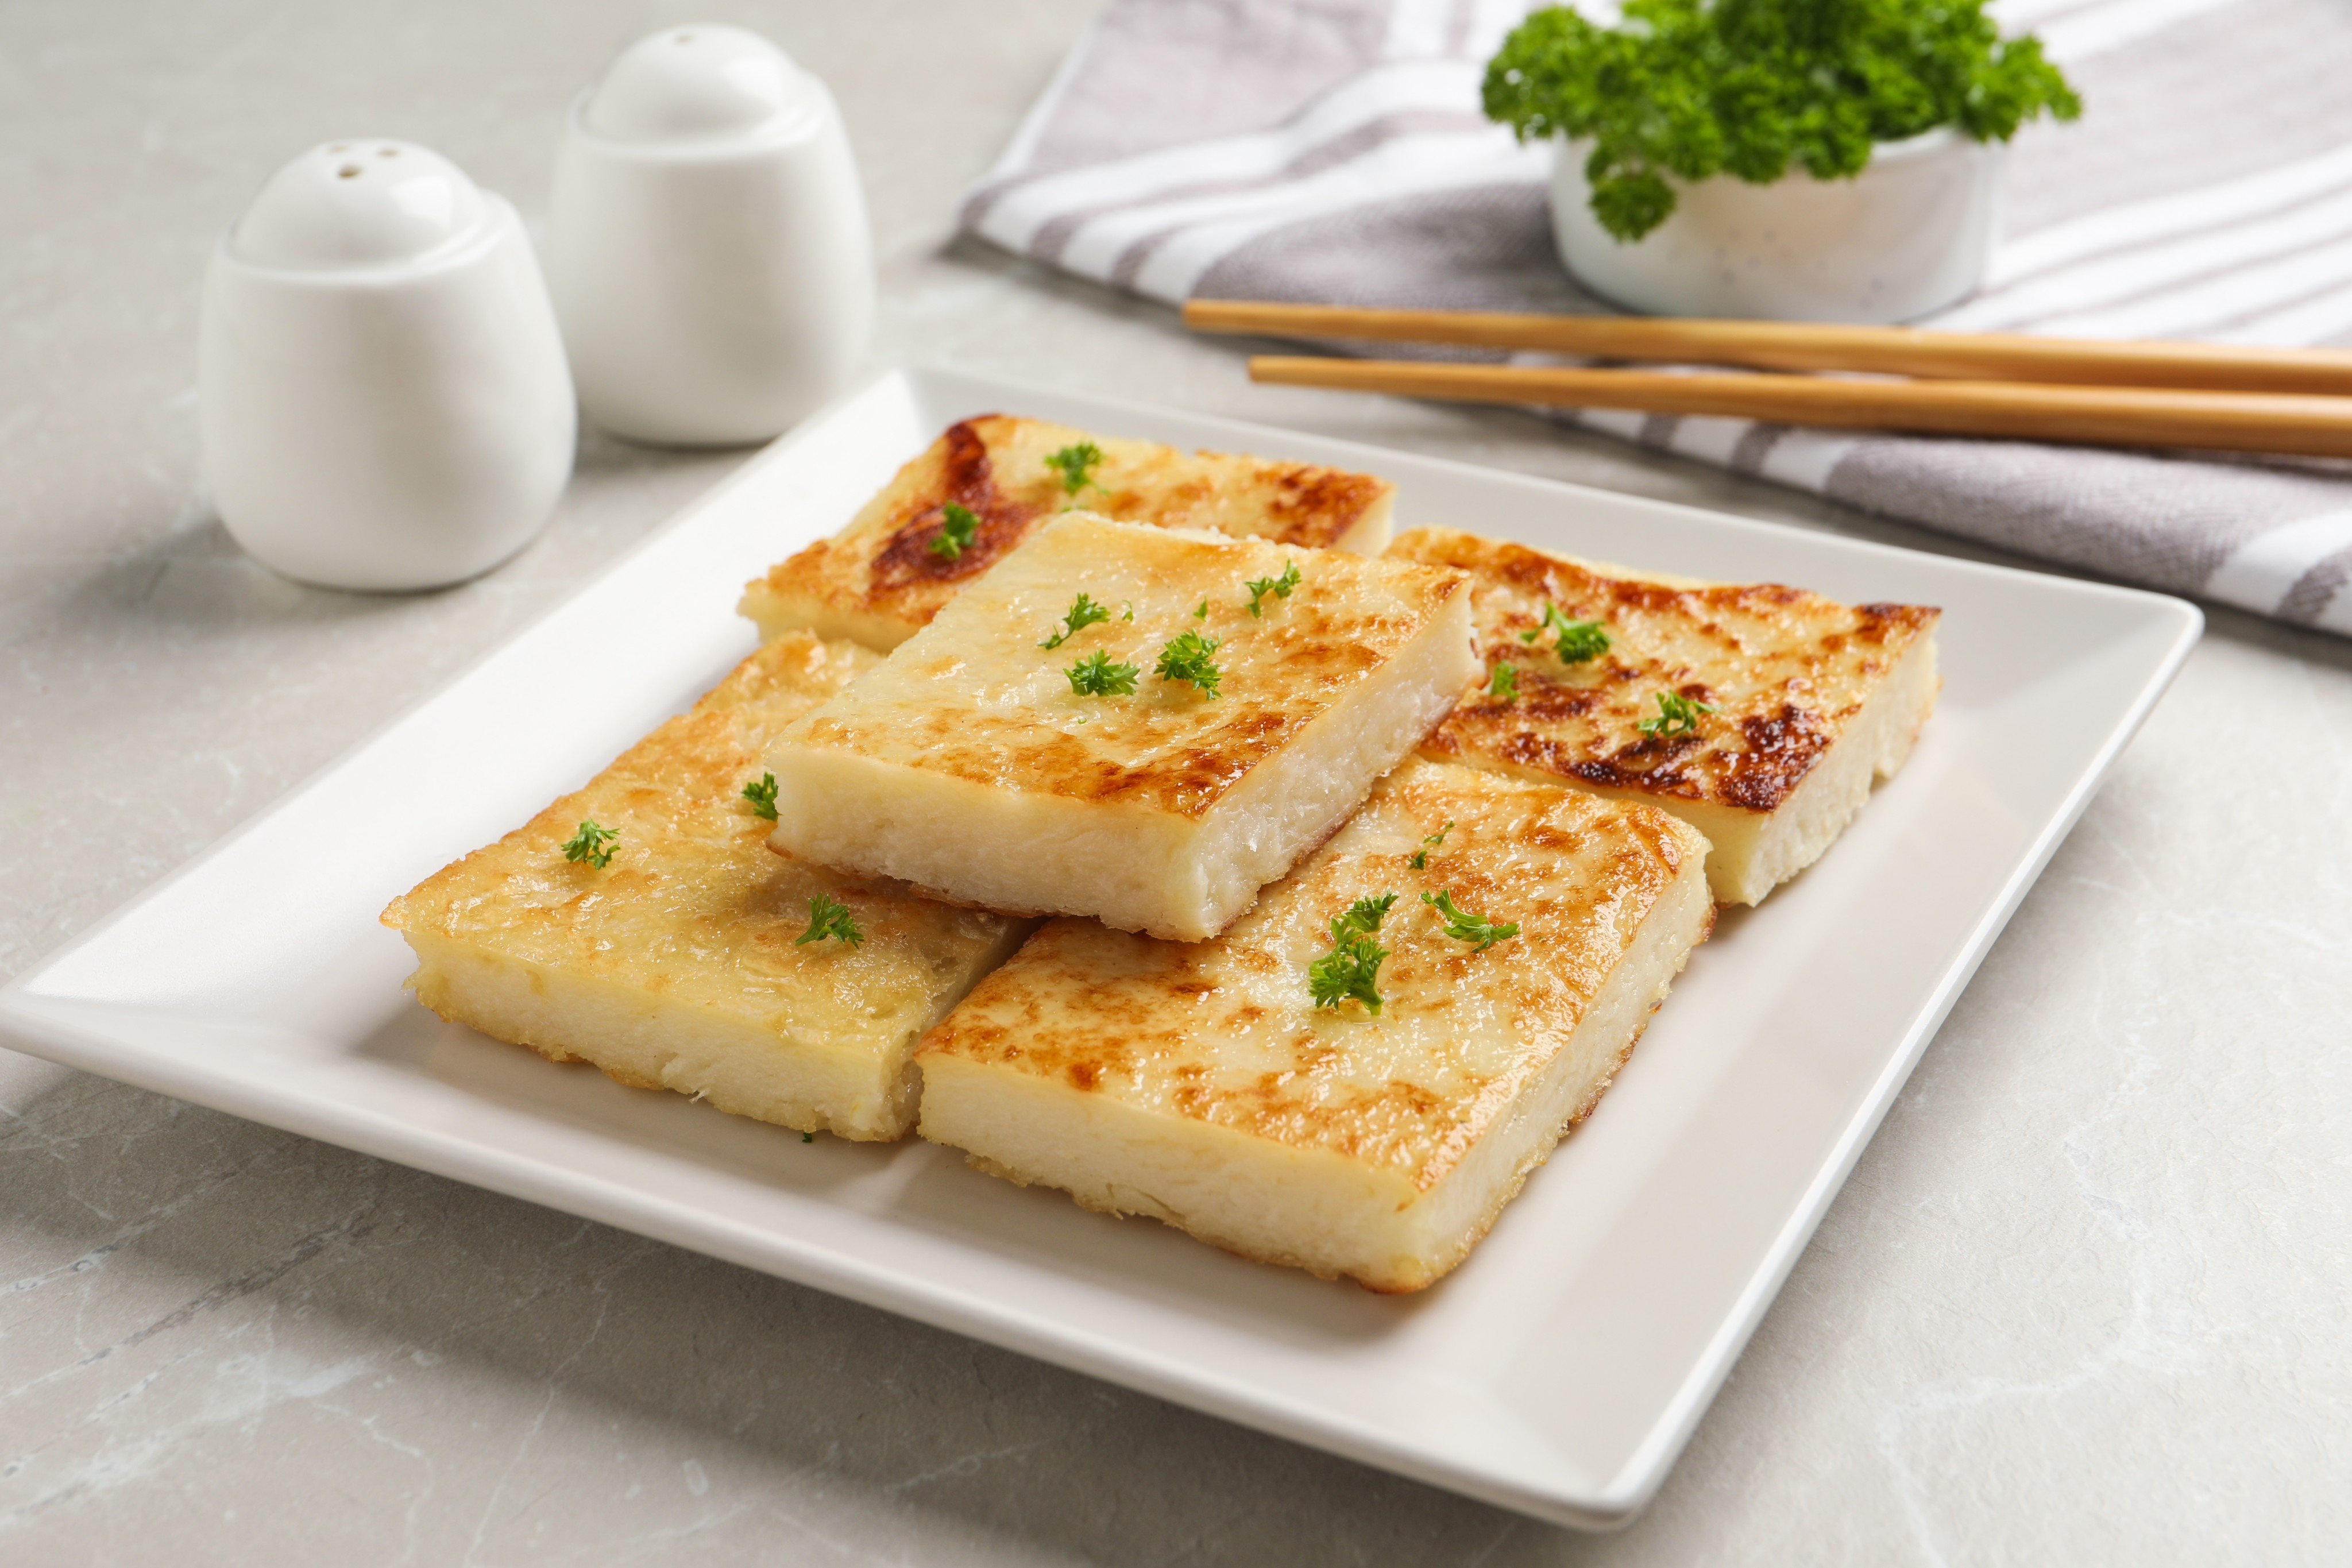 Most Hongkongers will say lo bak gou, or turnip cake, is a must-try dish for any authentic dim sum experience, but pan-fried versions can be too oily. Photo: Shutterstock